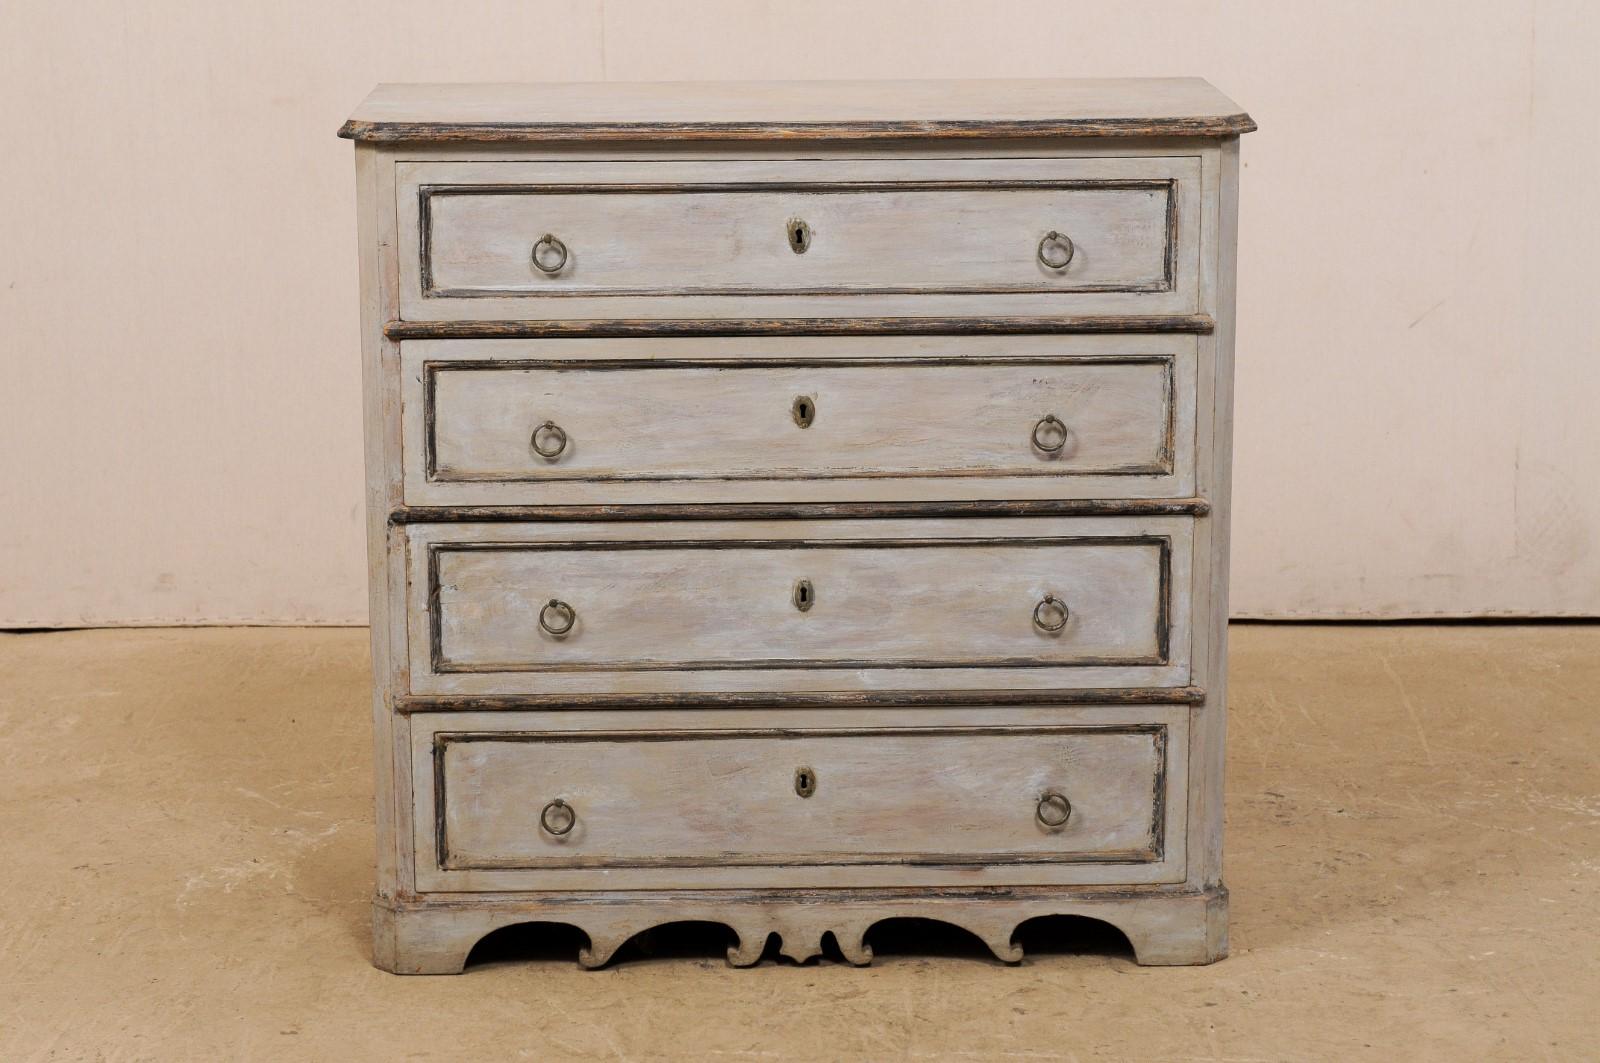 Hand-Painted Swedish Karl Johan Painted Wood Chest with Ornately Carved Skirt